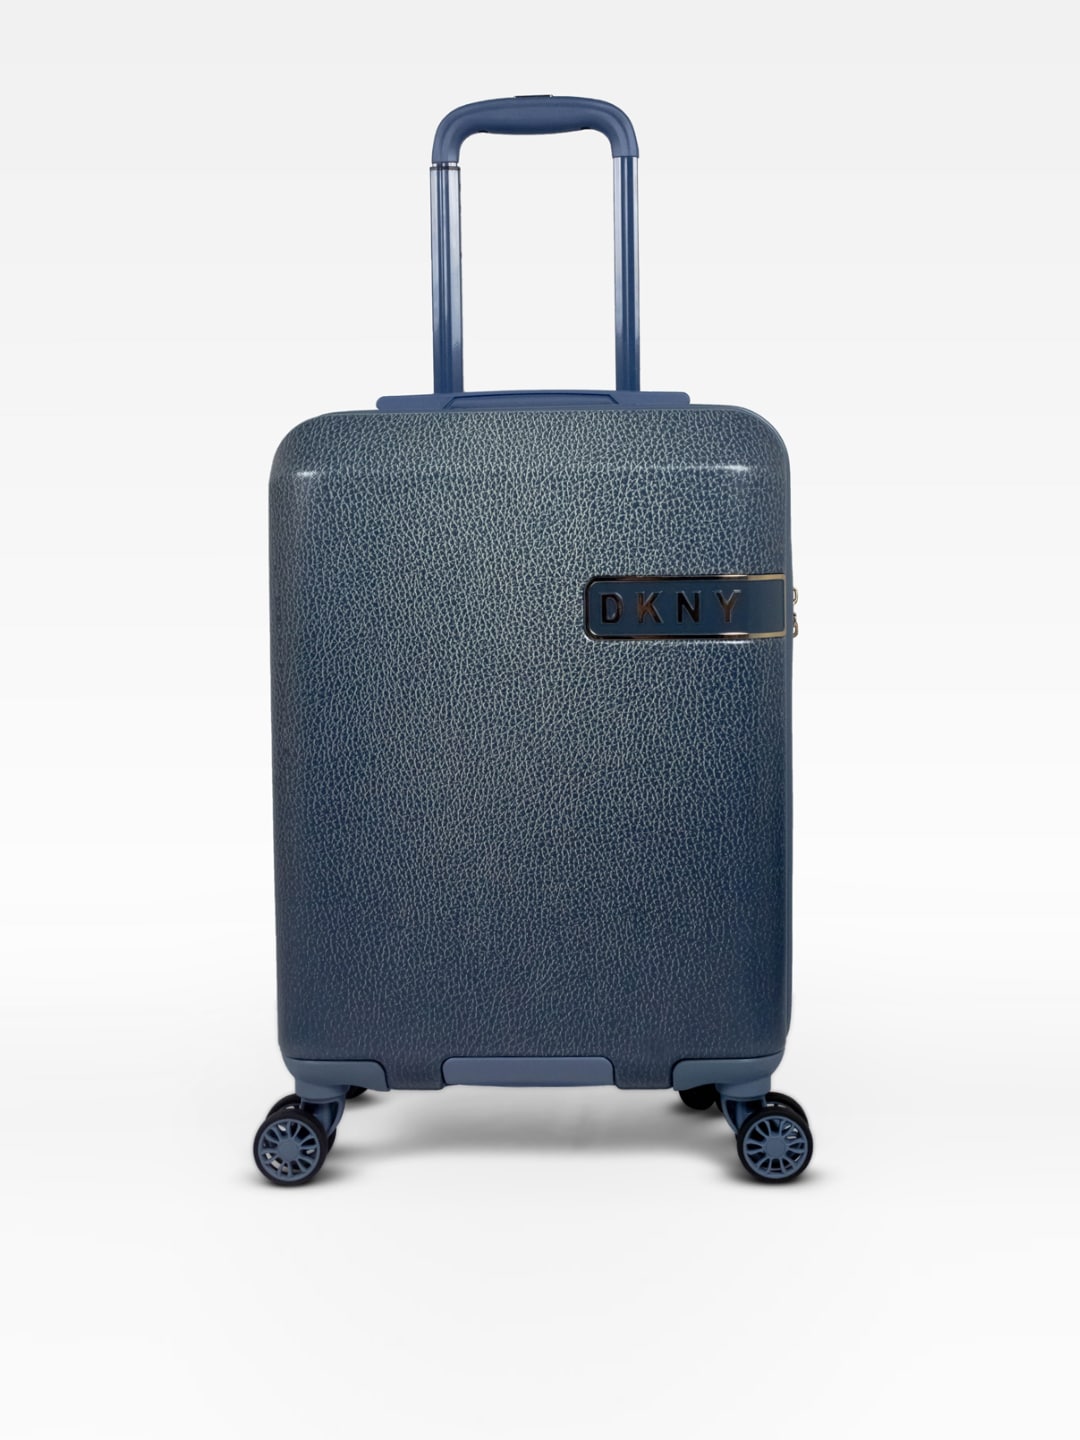 DKNY RAPTURE Range Colonial Blue Color Hard Cabin Luggage Price in India